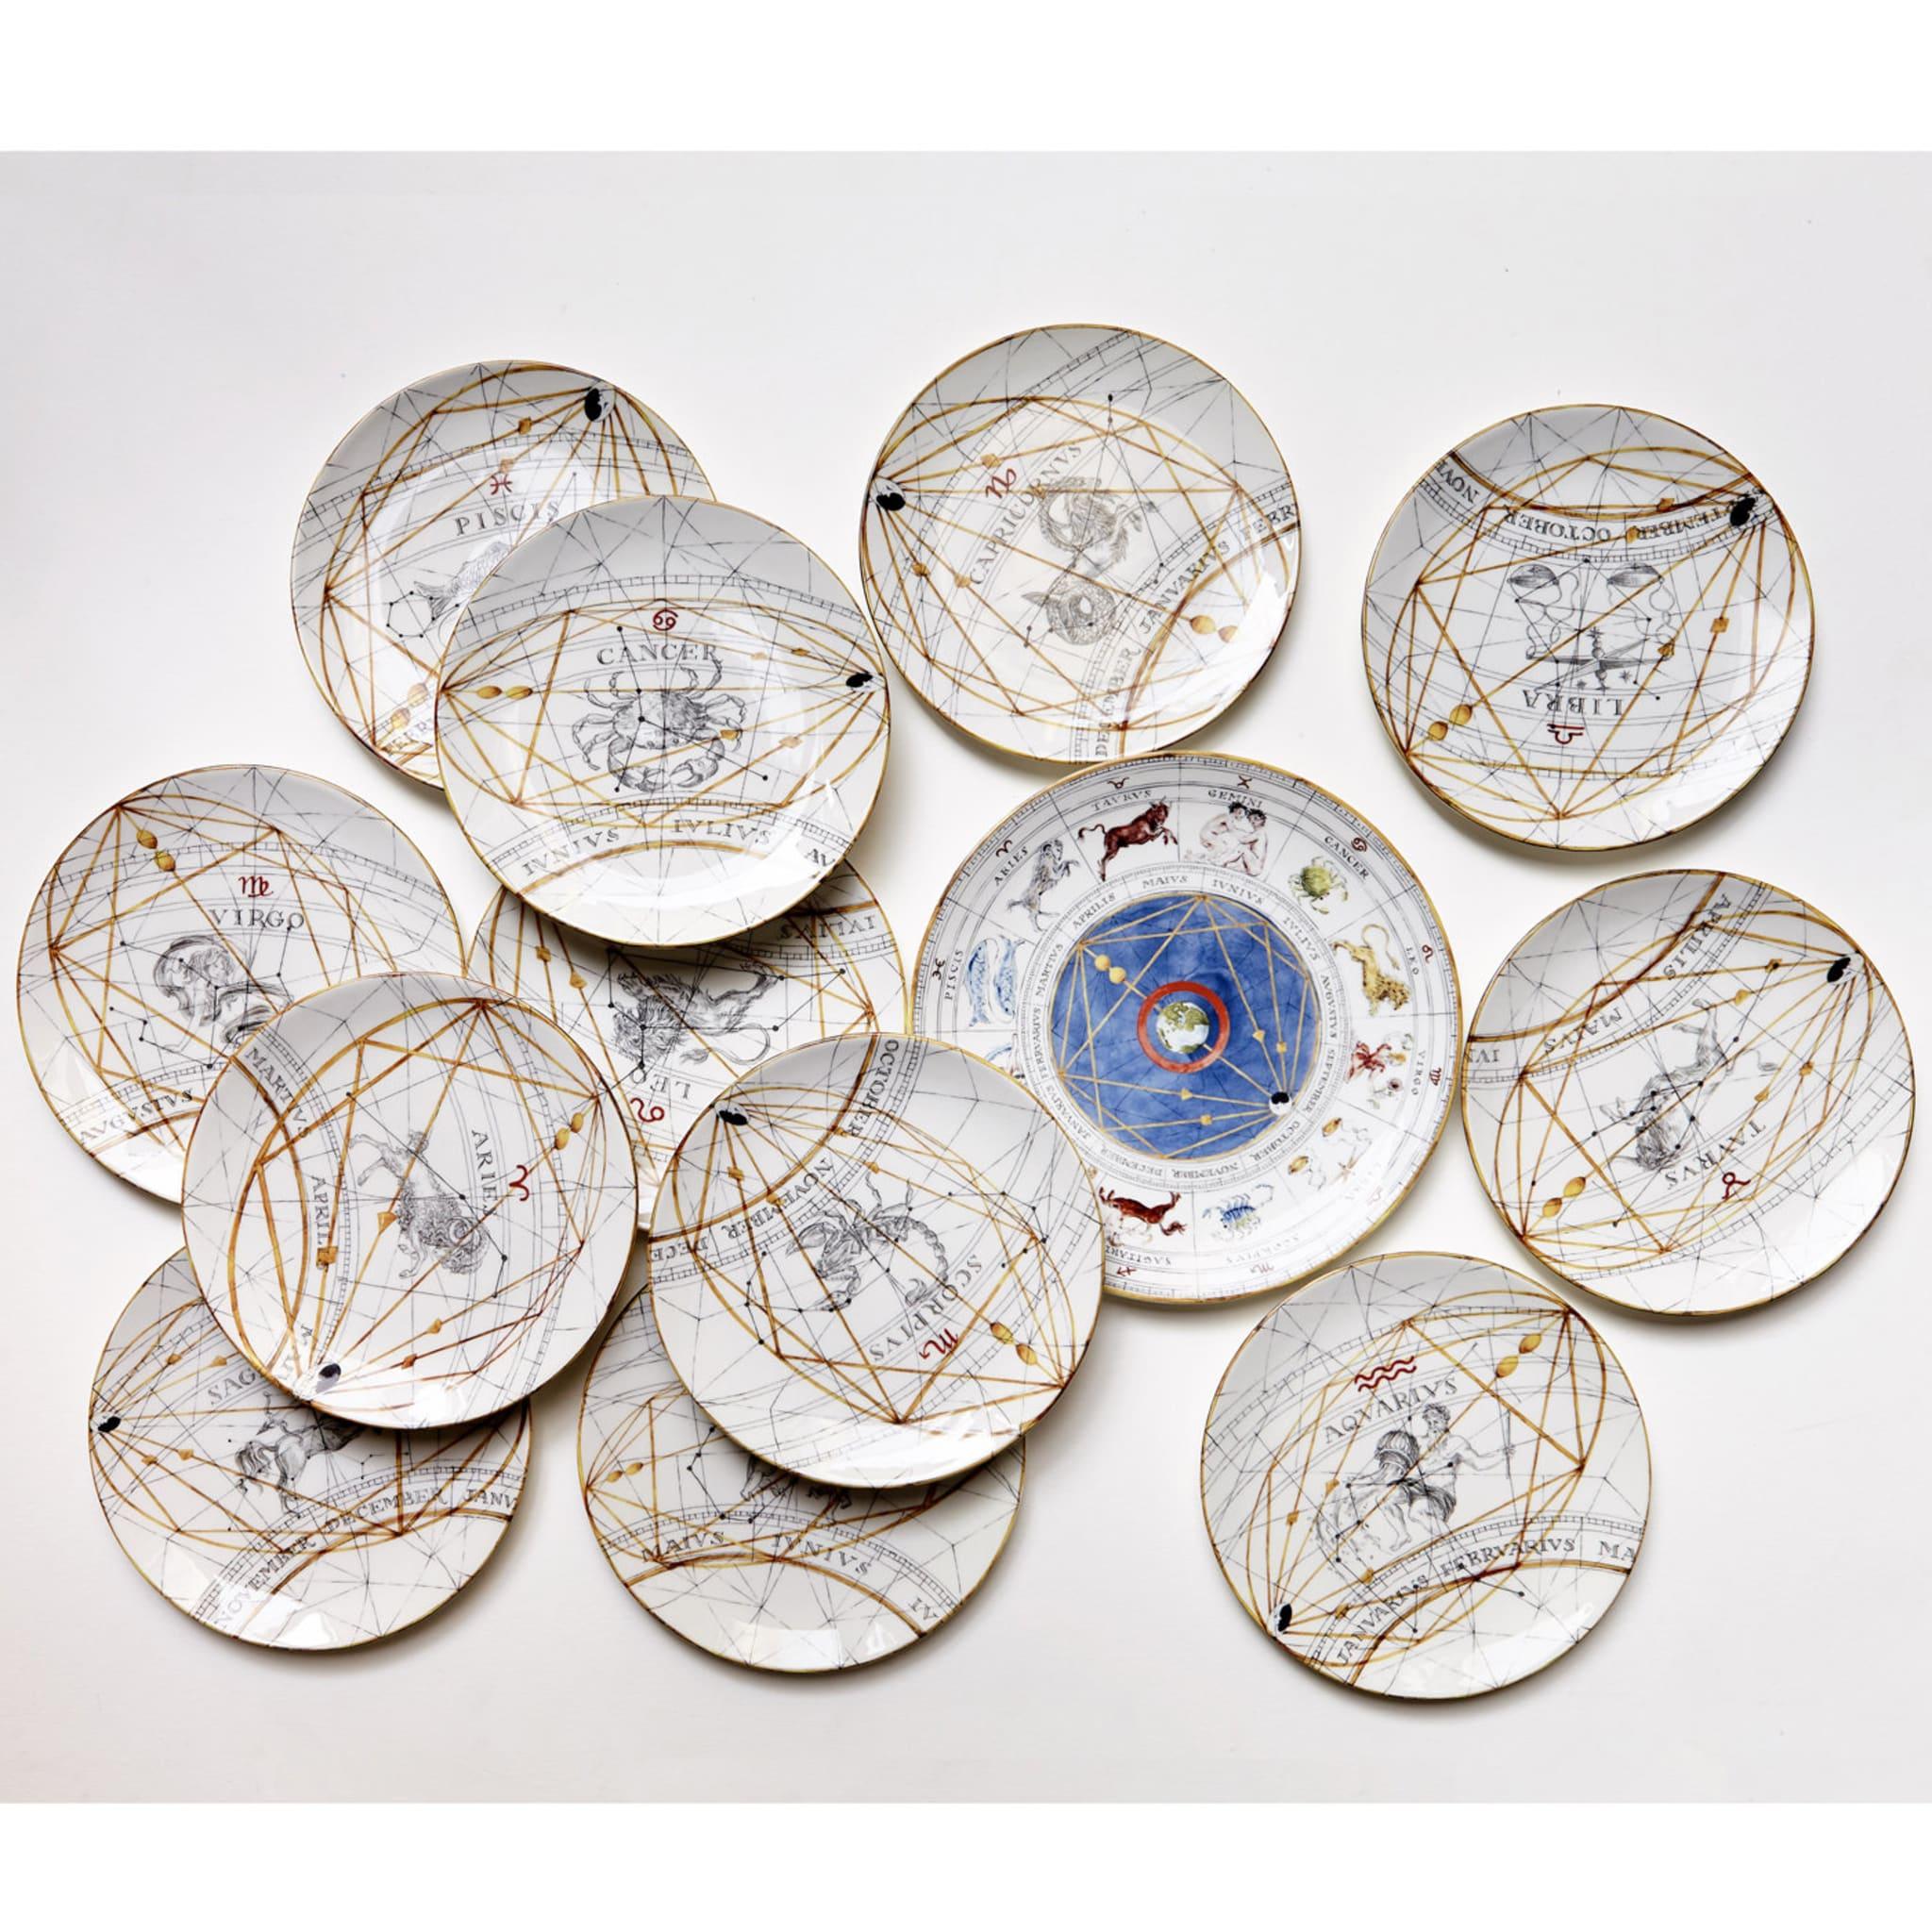 This superb ceramic plate is part of the Zodiaco collection introduced at the Milan Furniture Fair 2017. The center of this dish is adorned with a blue circle enclosing the earth and connecting with golden lines the twelve astrological signs that